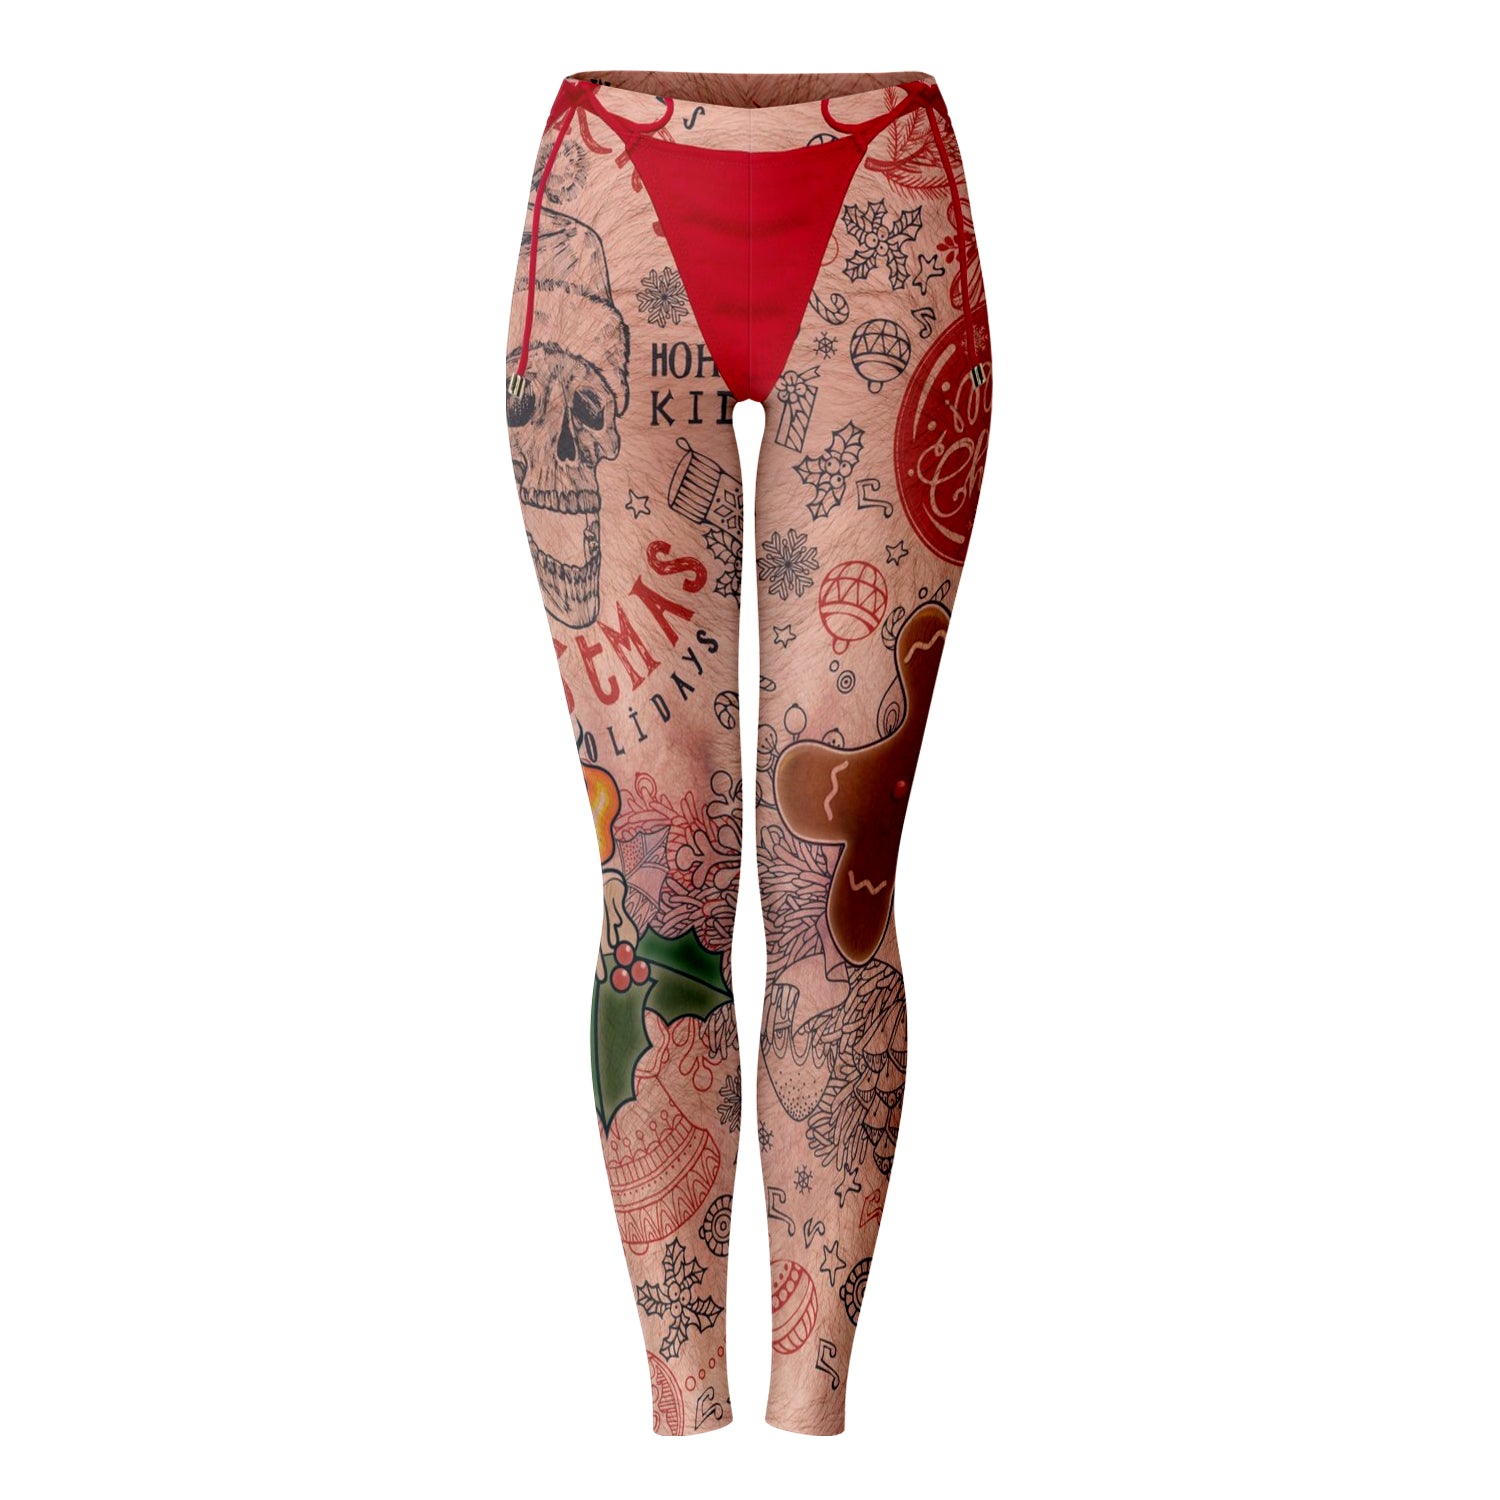 Dsquared2 Woman Leggings Red Size L Polyester, Elastane